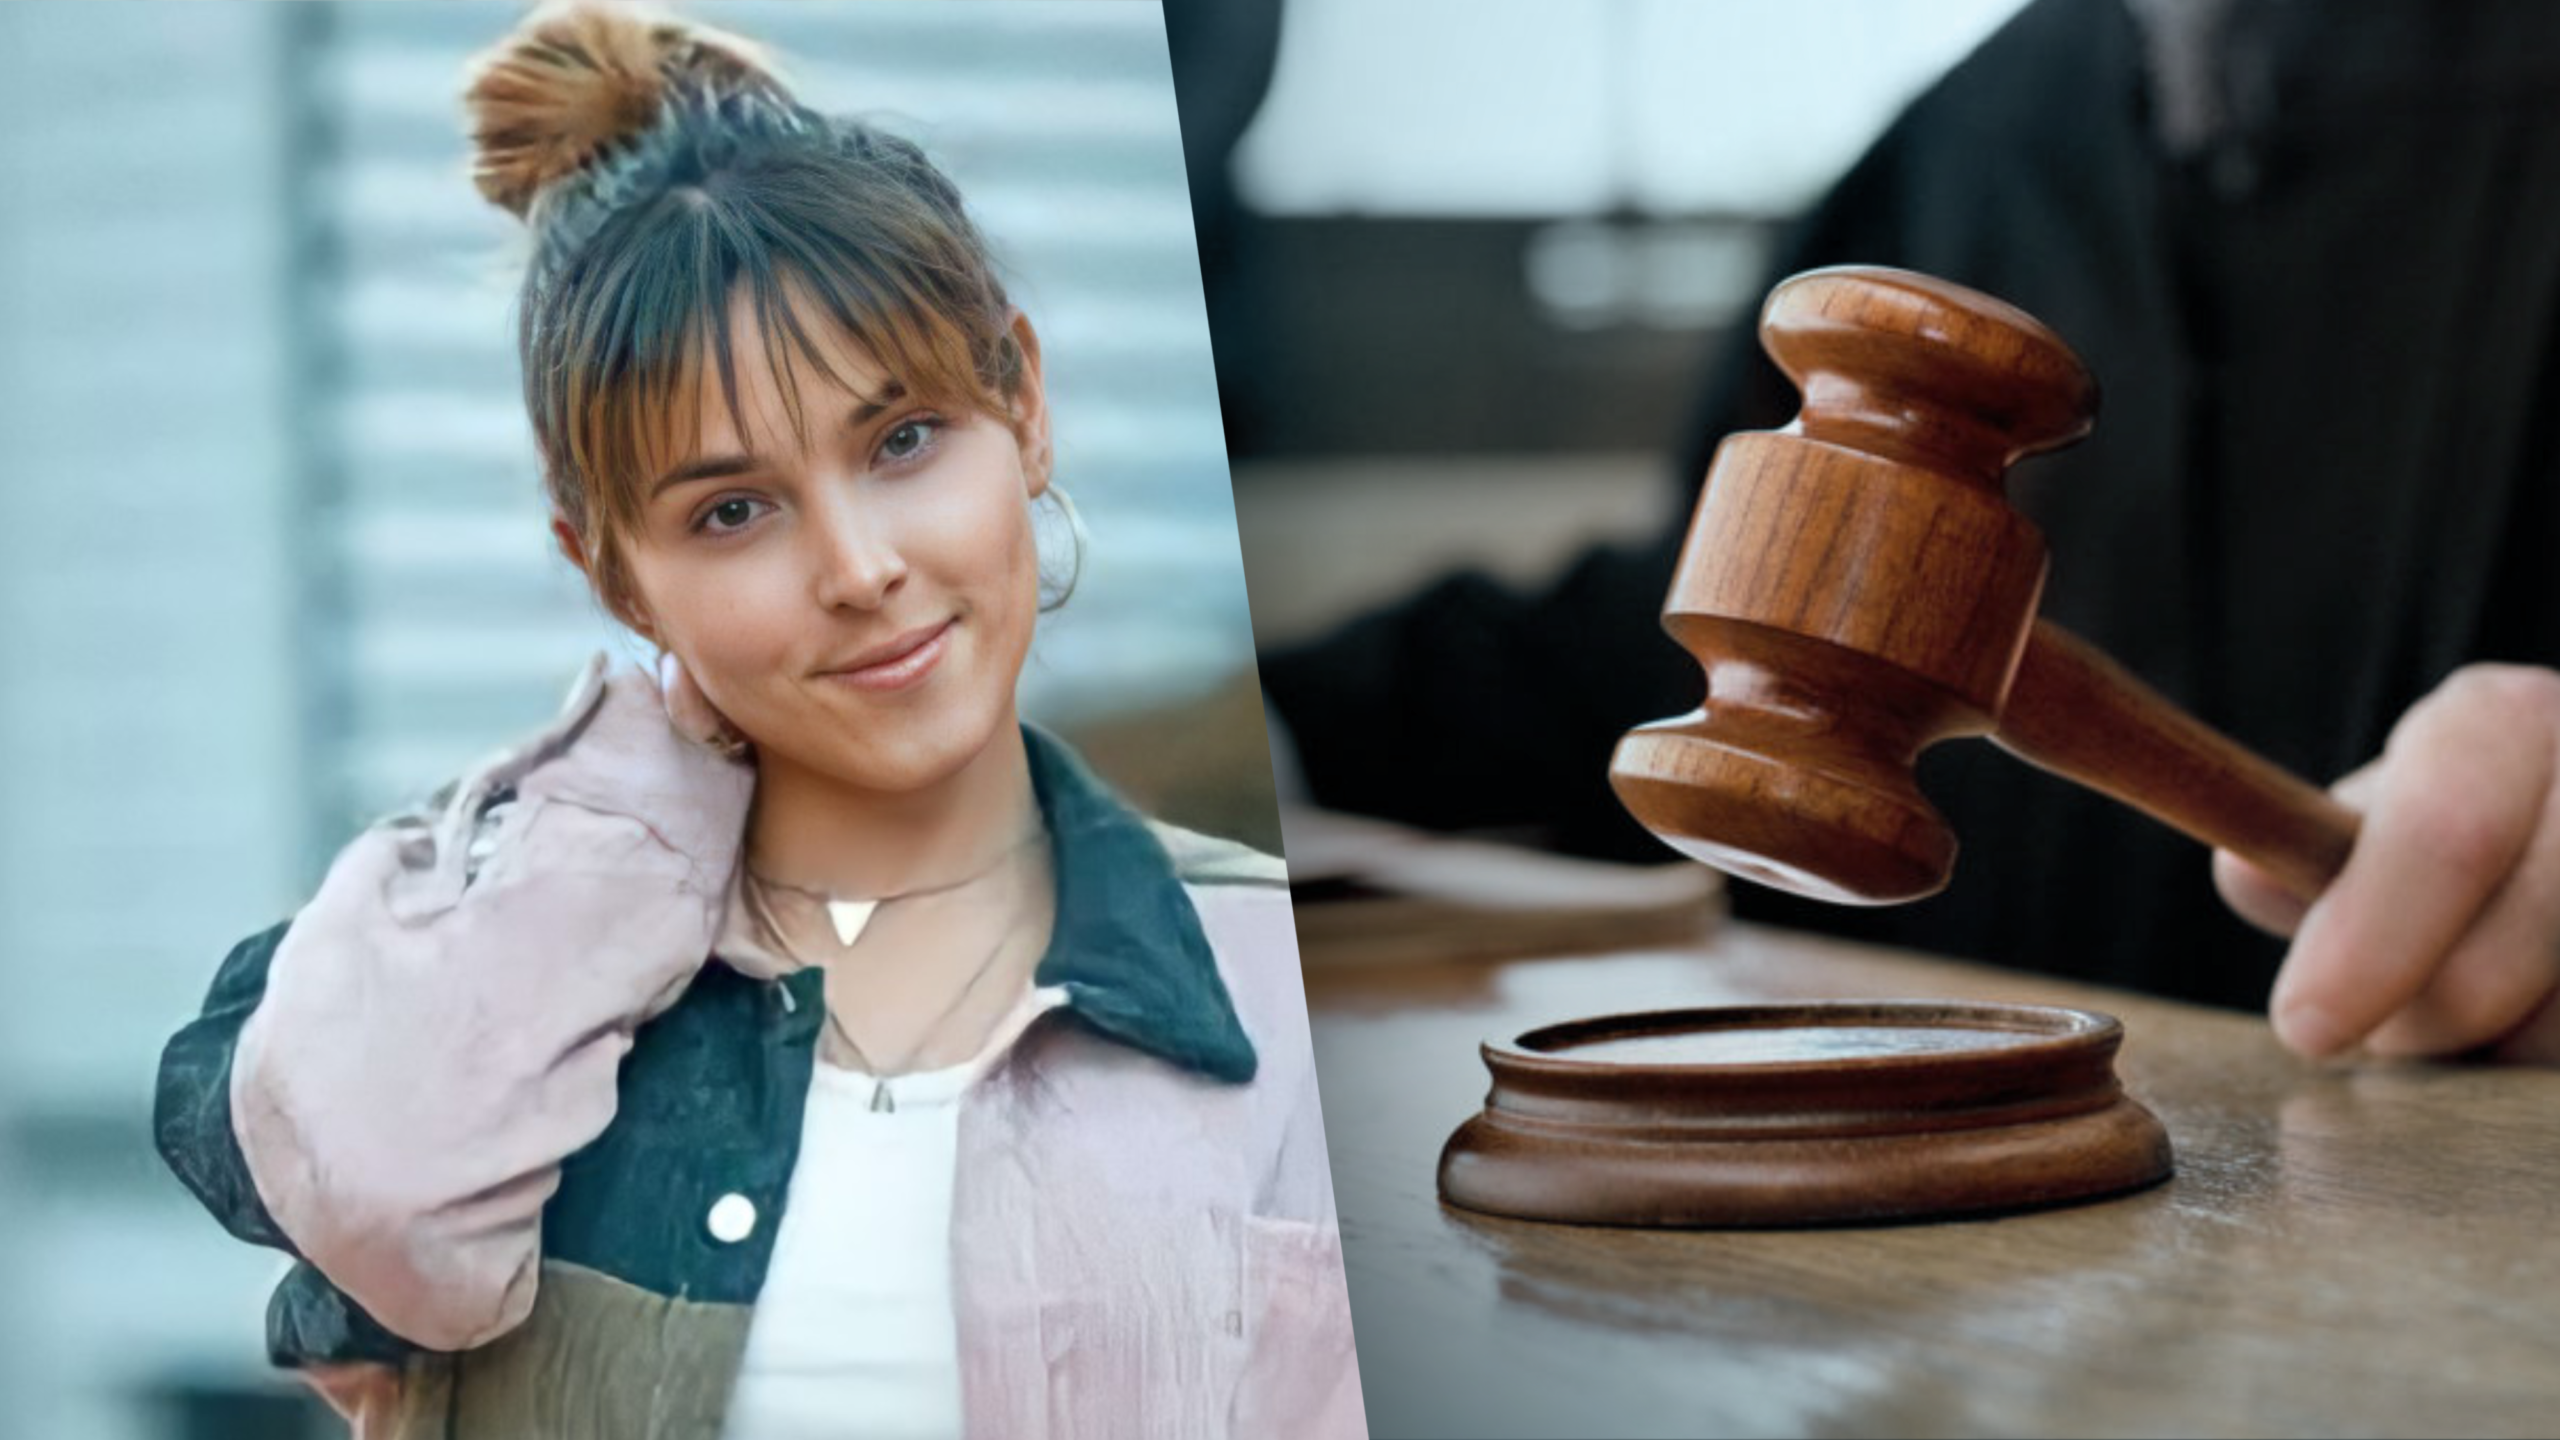 Colombian Supreme Court Rules Social Media Star Can’t Be
Censored for Sharing Biblical Beliefs 1